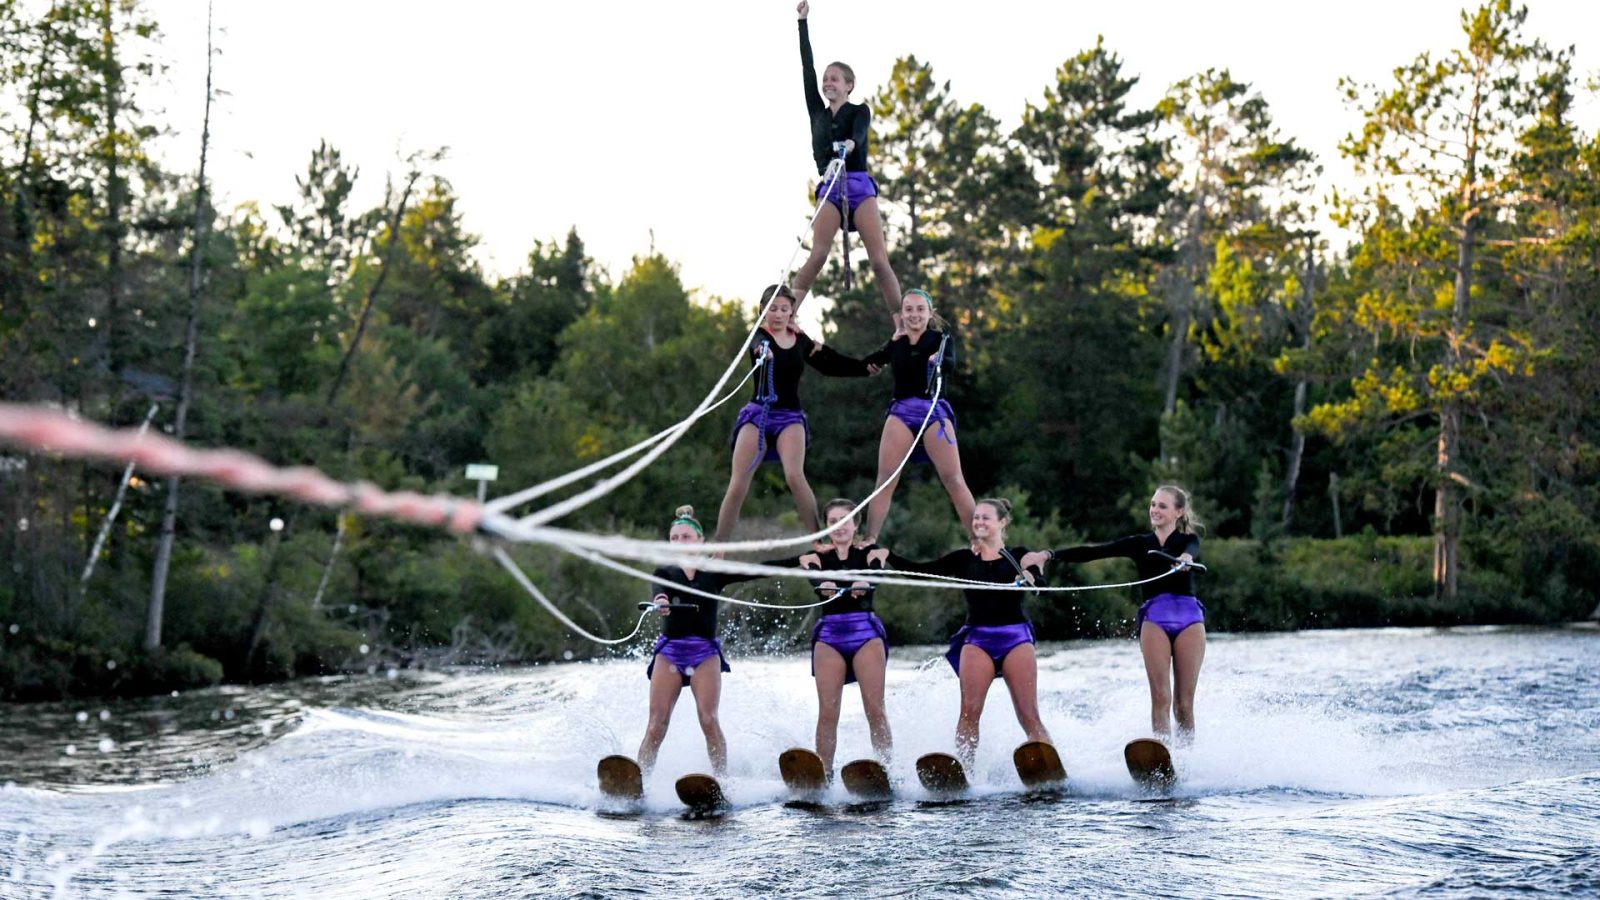 pyramid of water skiers performing show